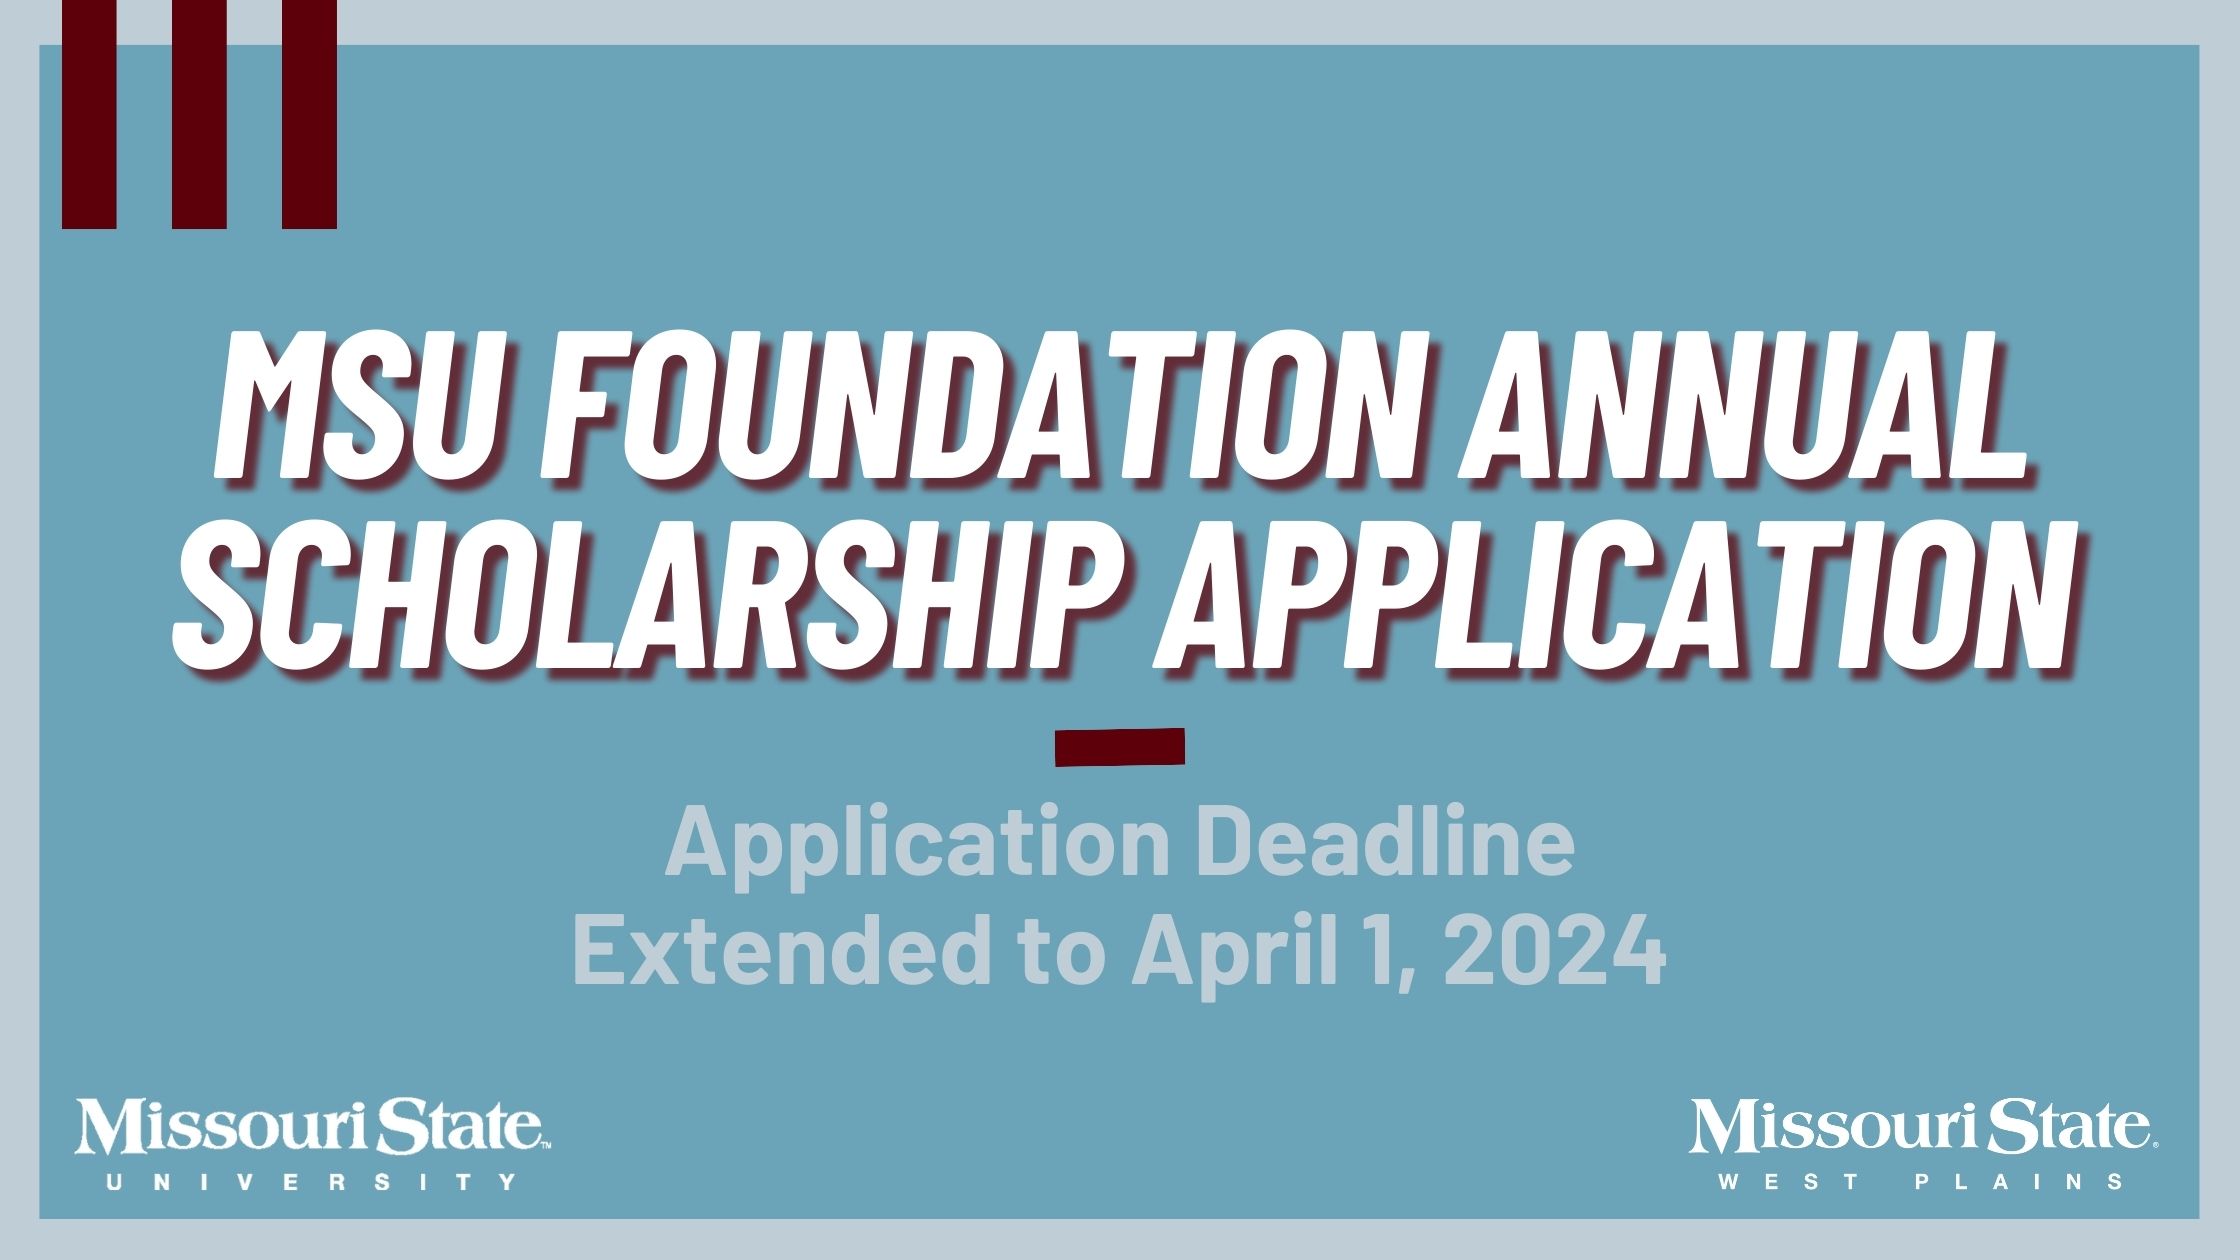 the MSU Foundation Annual Scholarship Application deadline has been extended from March 1 to April 1.